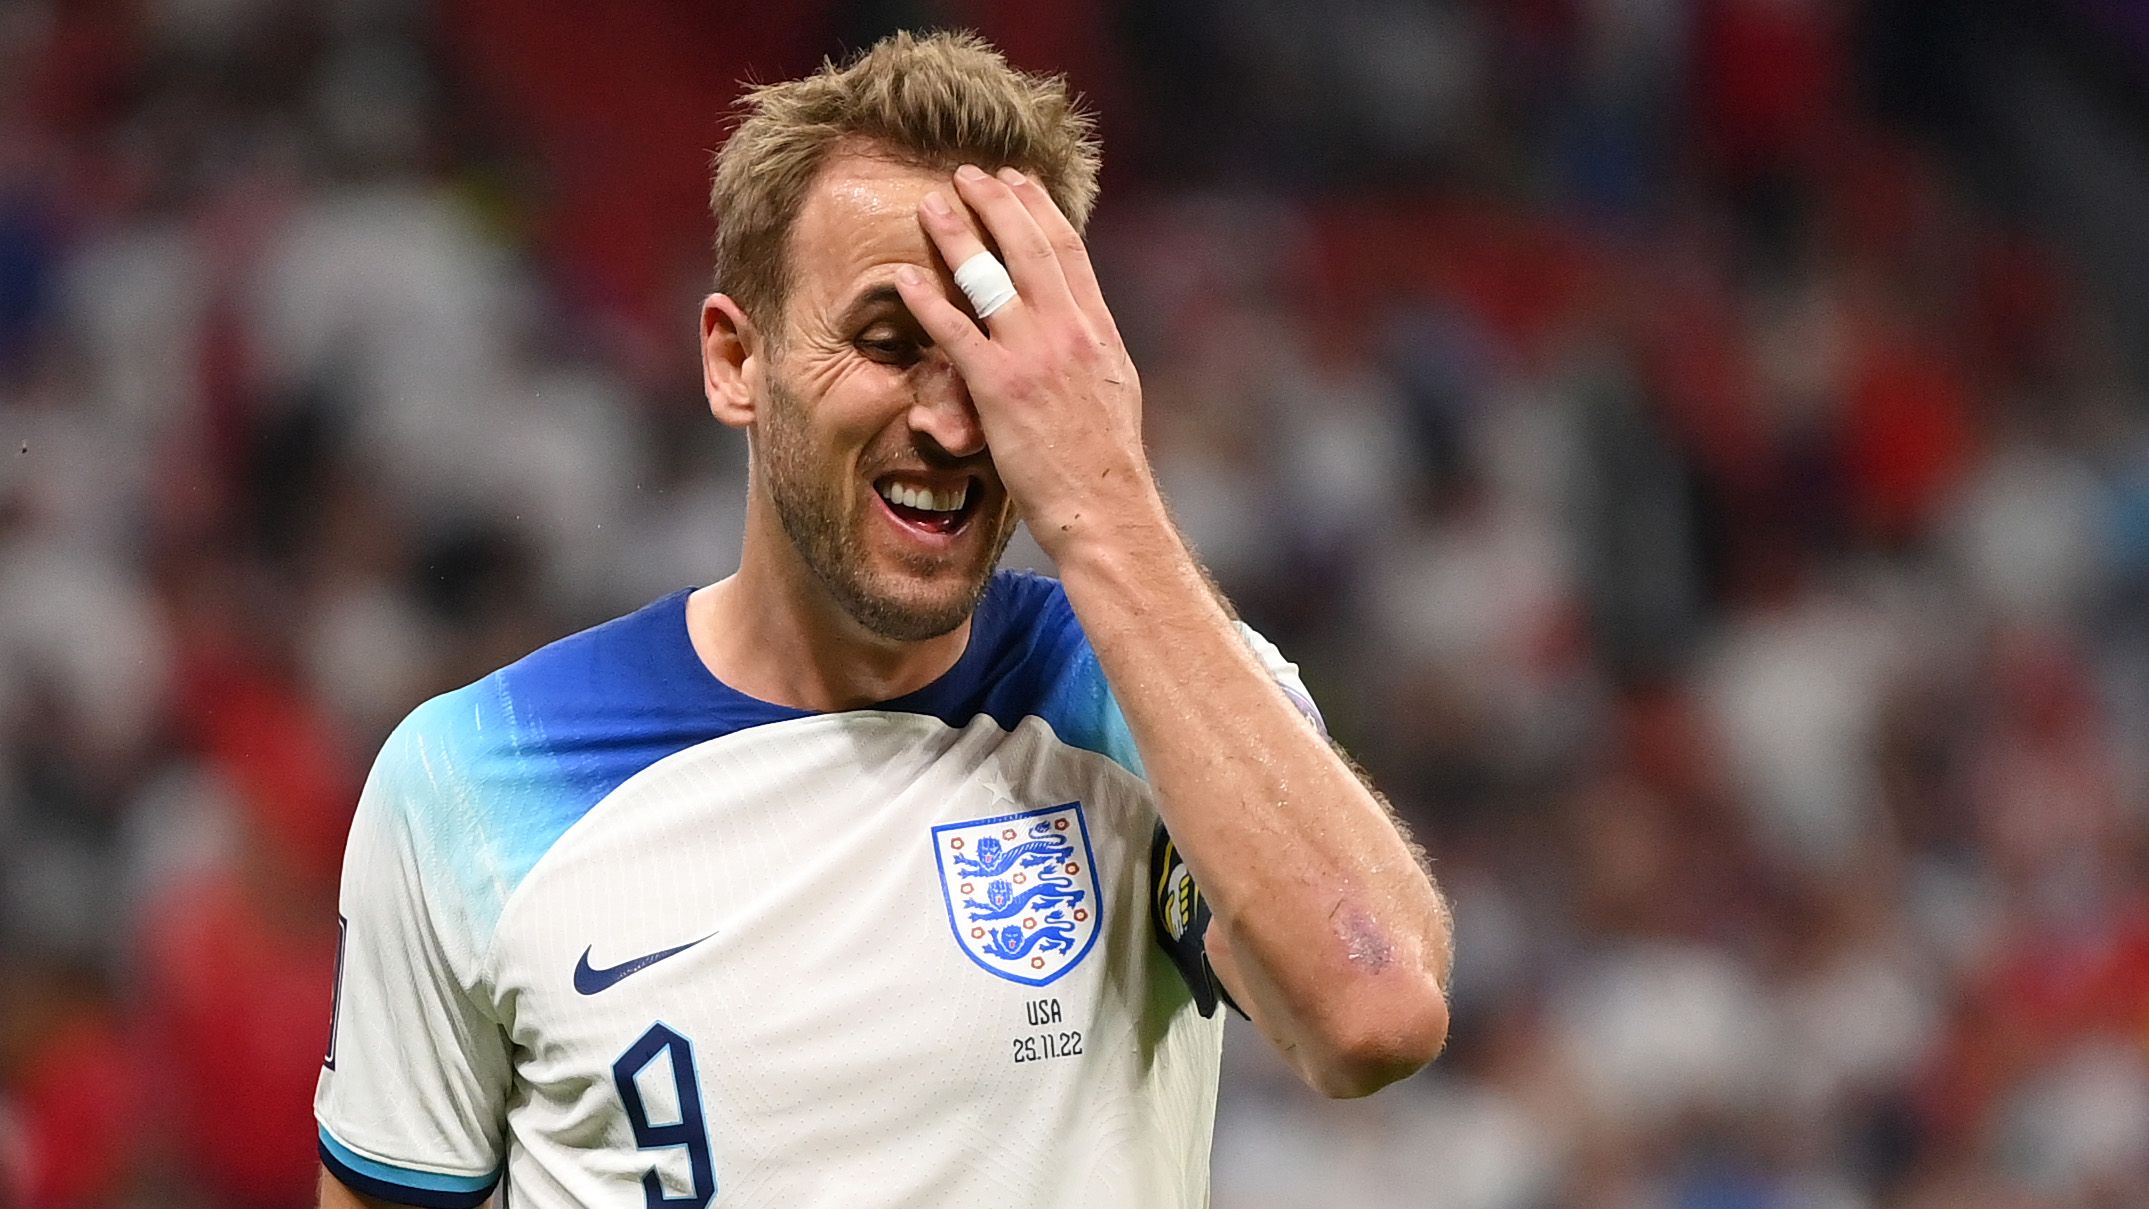 Harry Kane of England reacts after the 0-0 draw during the FIFA World Cup Qatar 2022 Group B match between England and USA at Al Bayt Stadium on November 25, 2022 in Al Khor, Qatar. (Photo by Michael Regan - FIFA/FIFA via Getty Images)